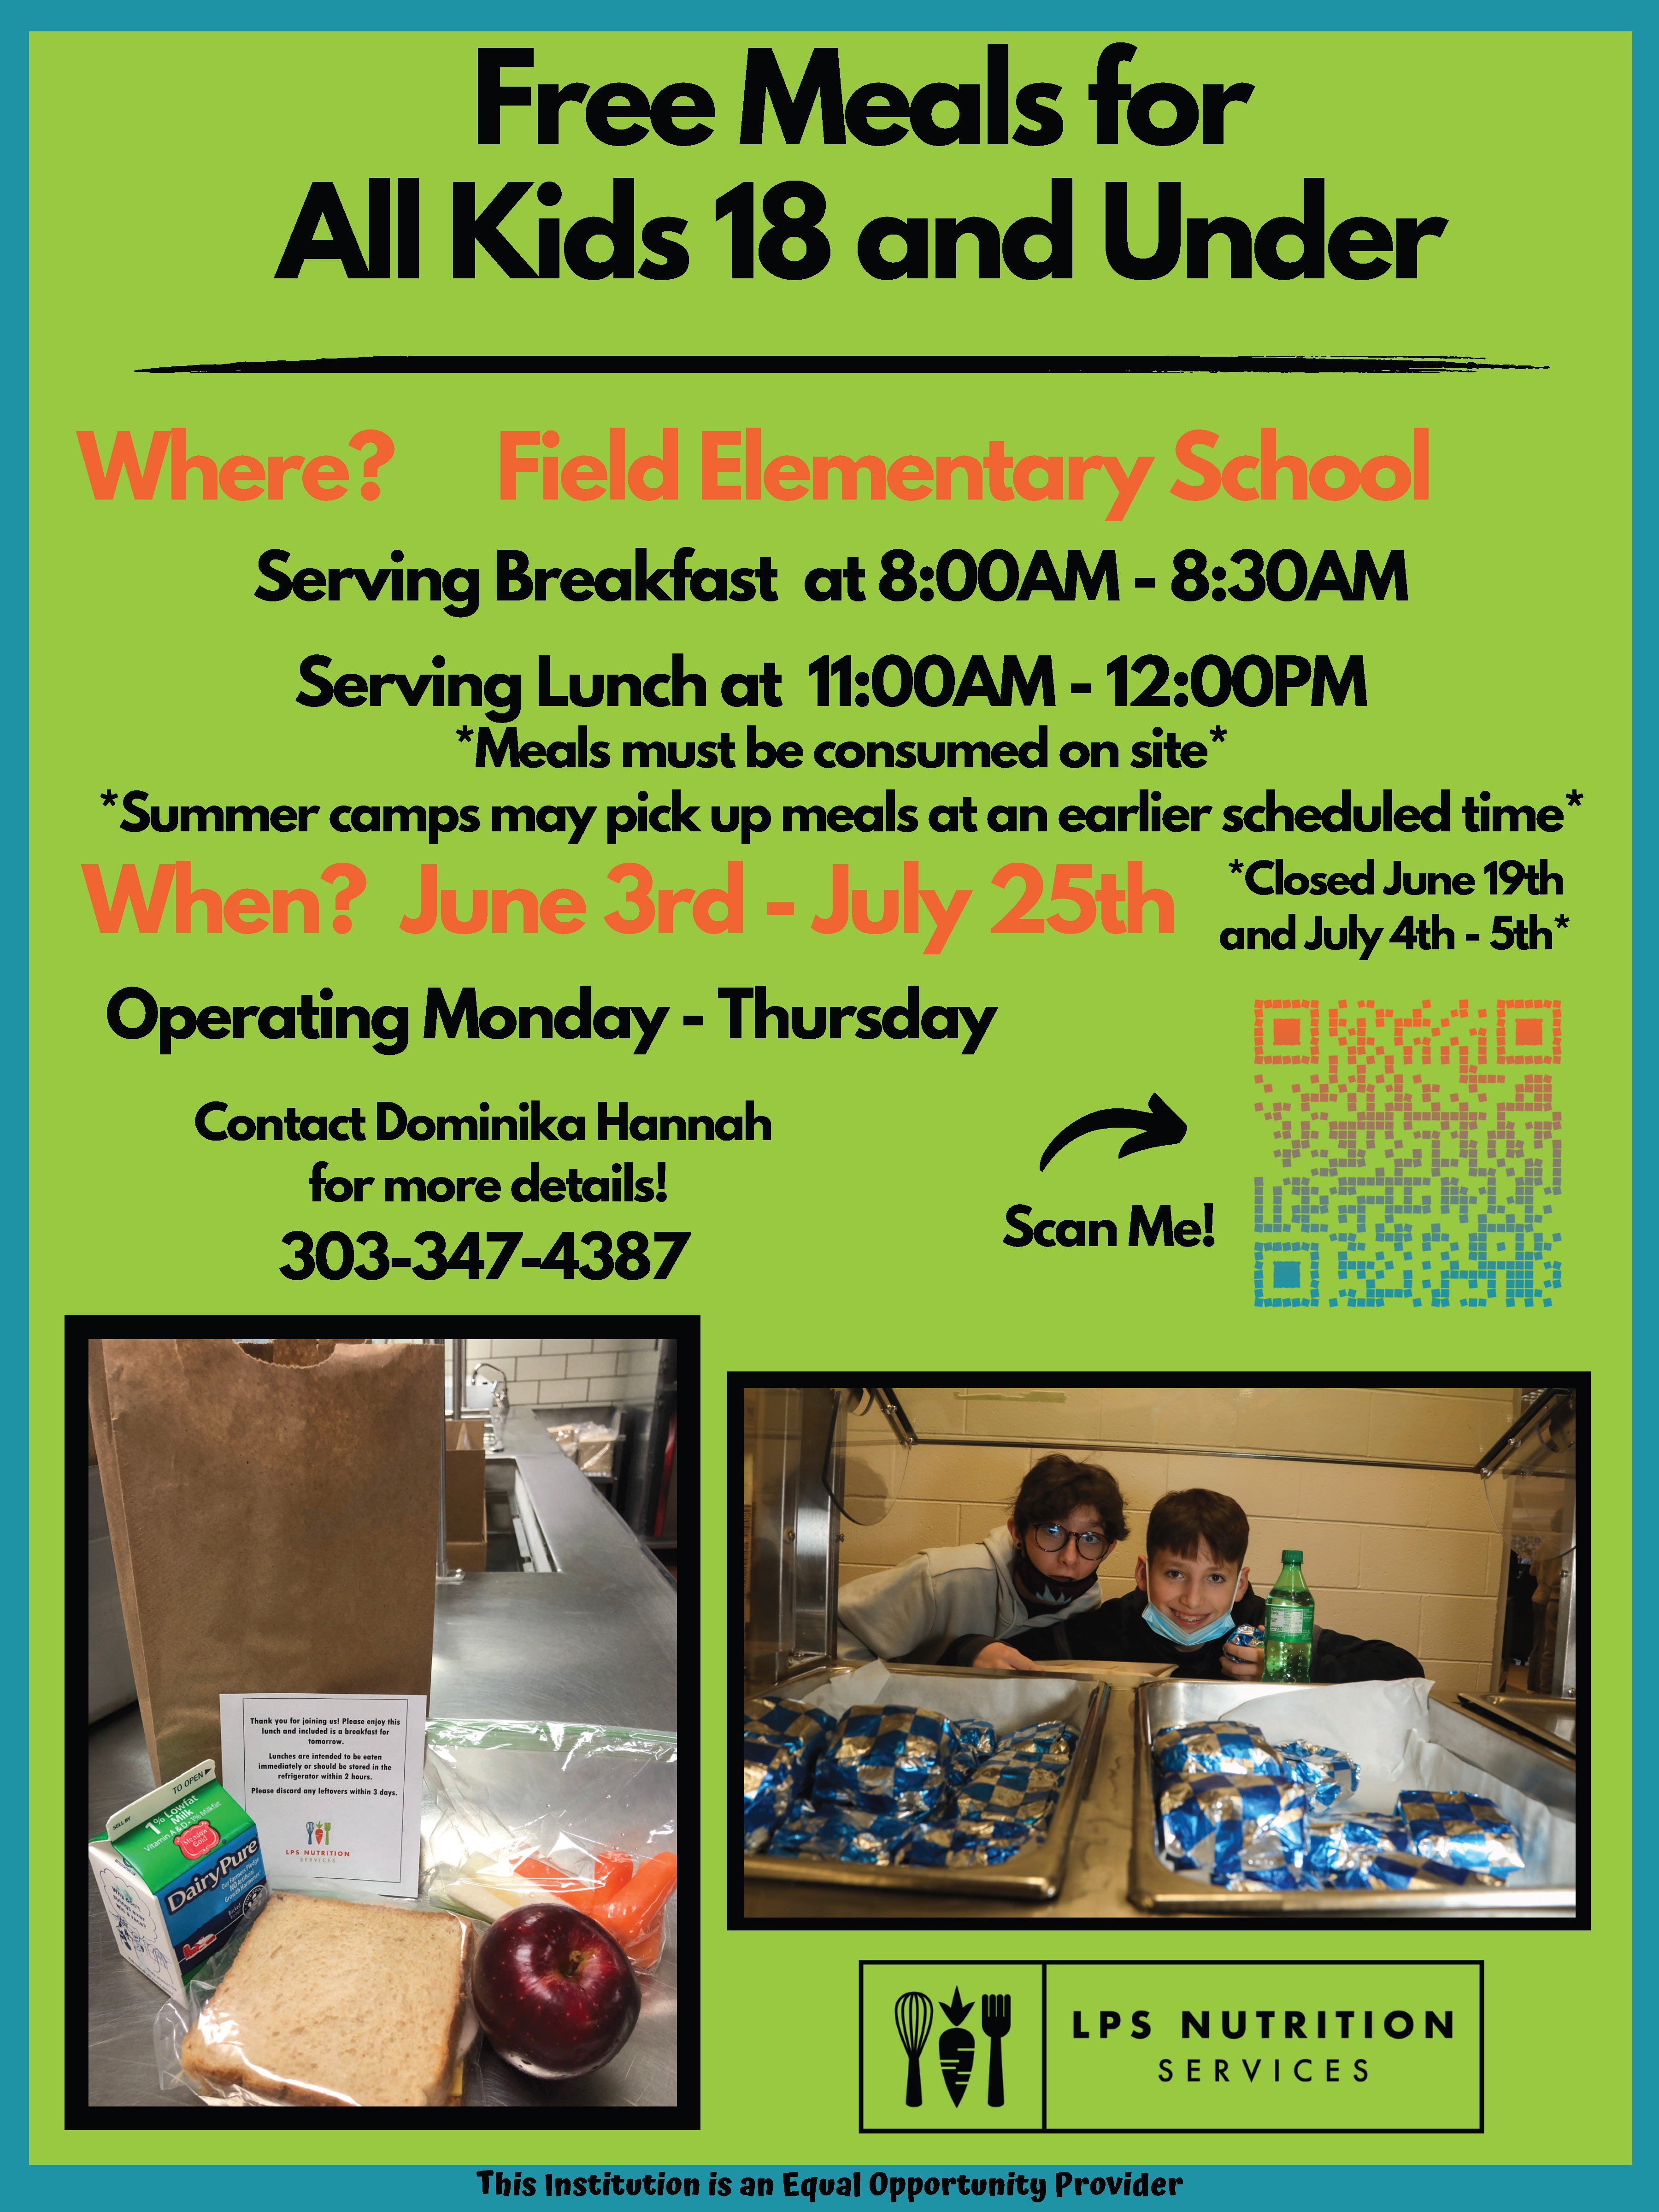 Flyer for Summer Feeding Program in English. All information from flyer can be found in writing above image.